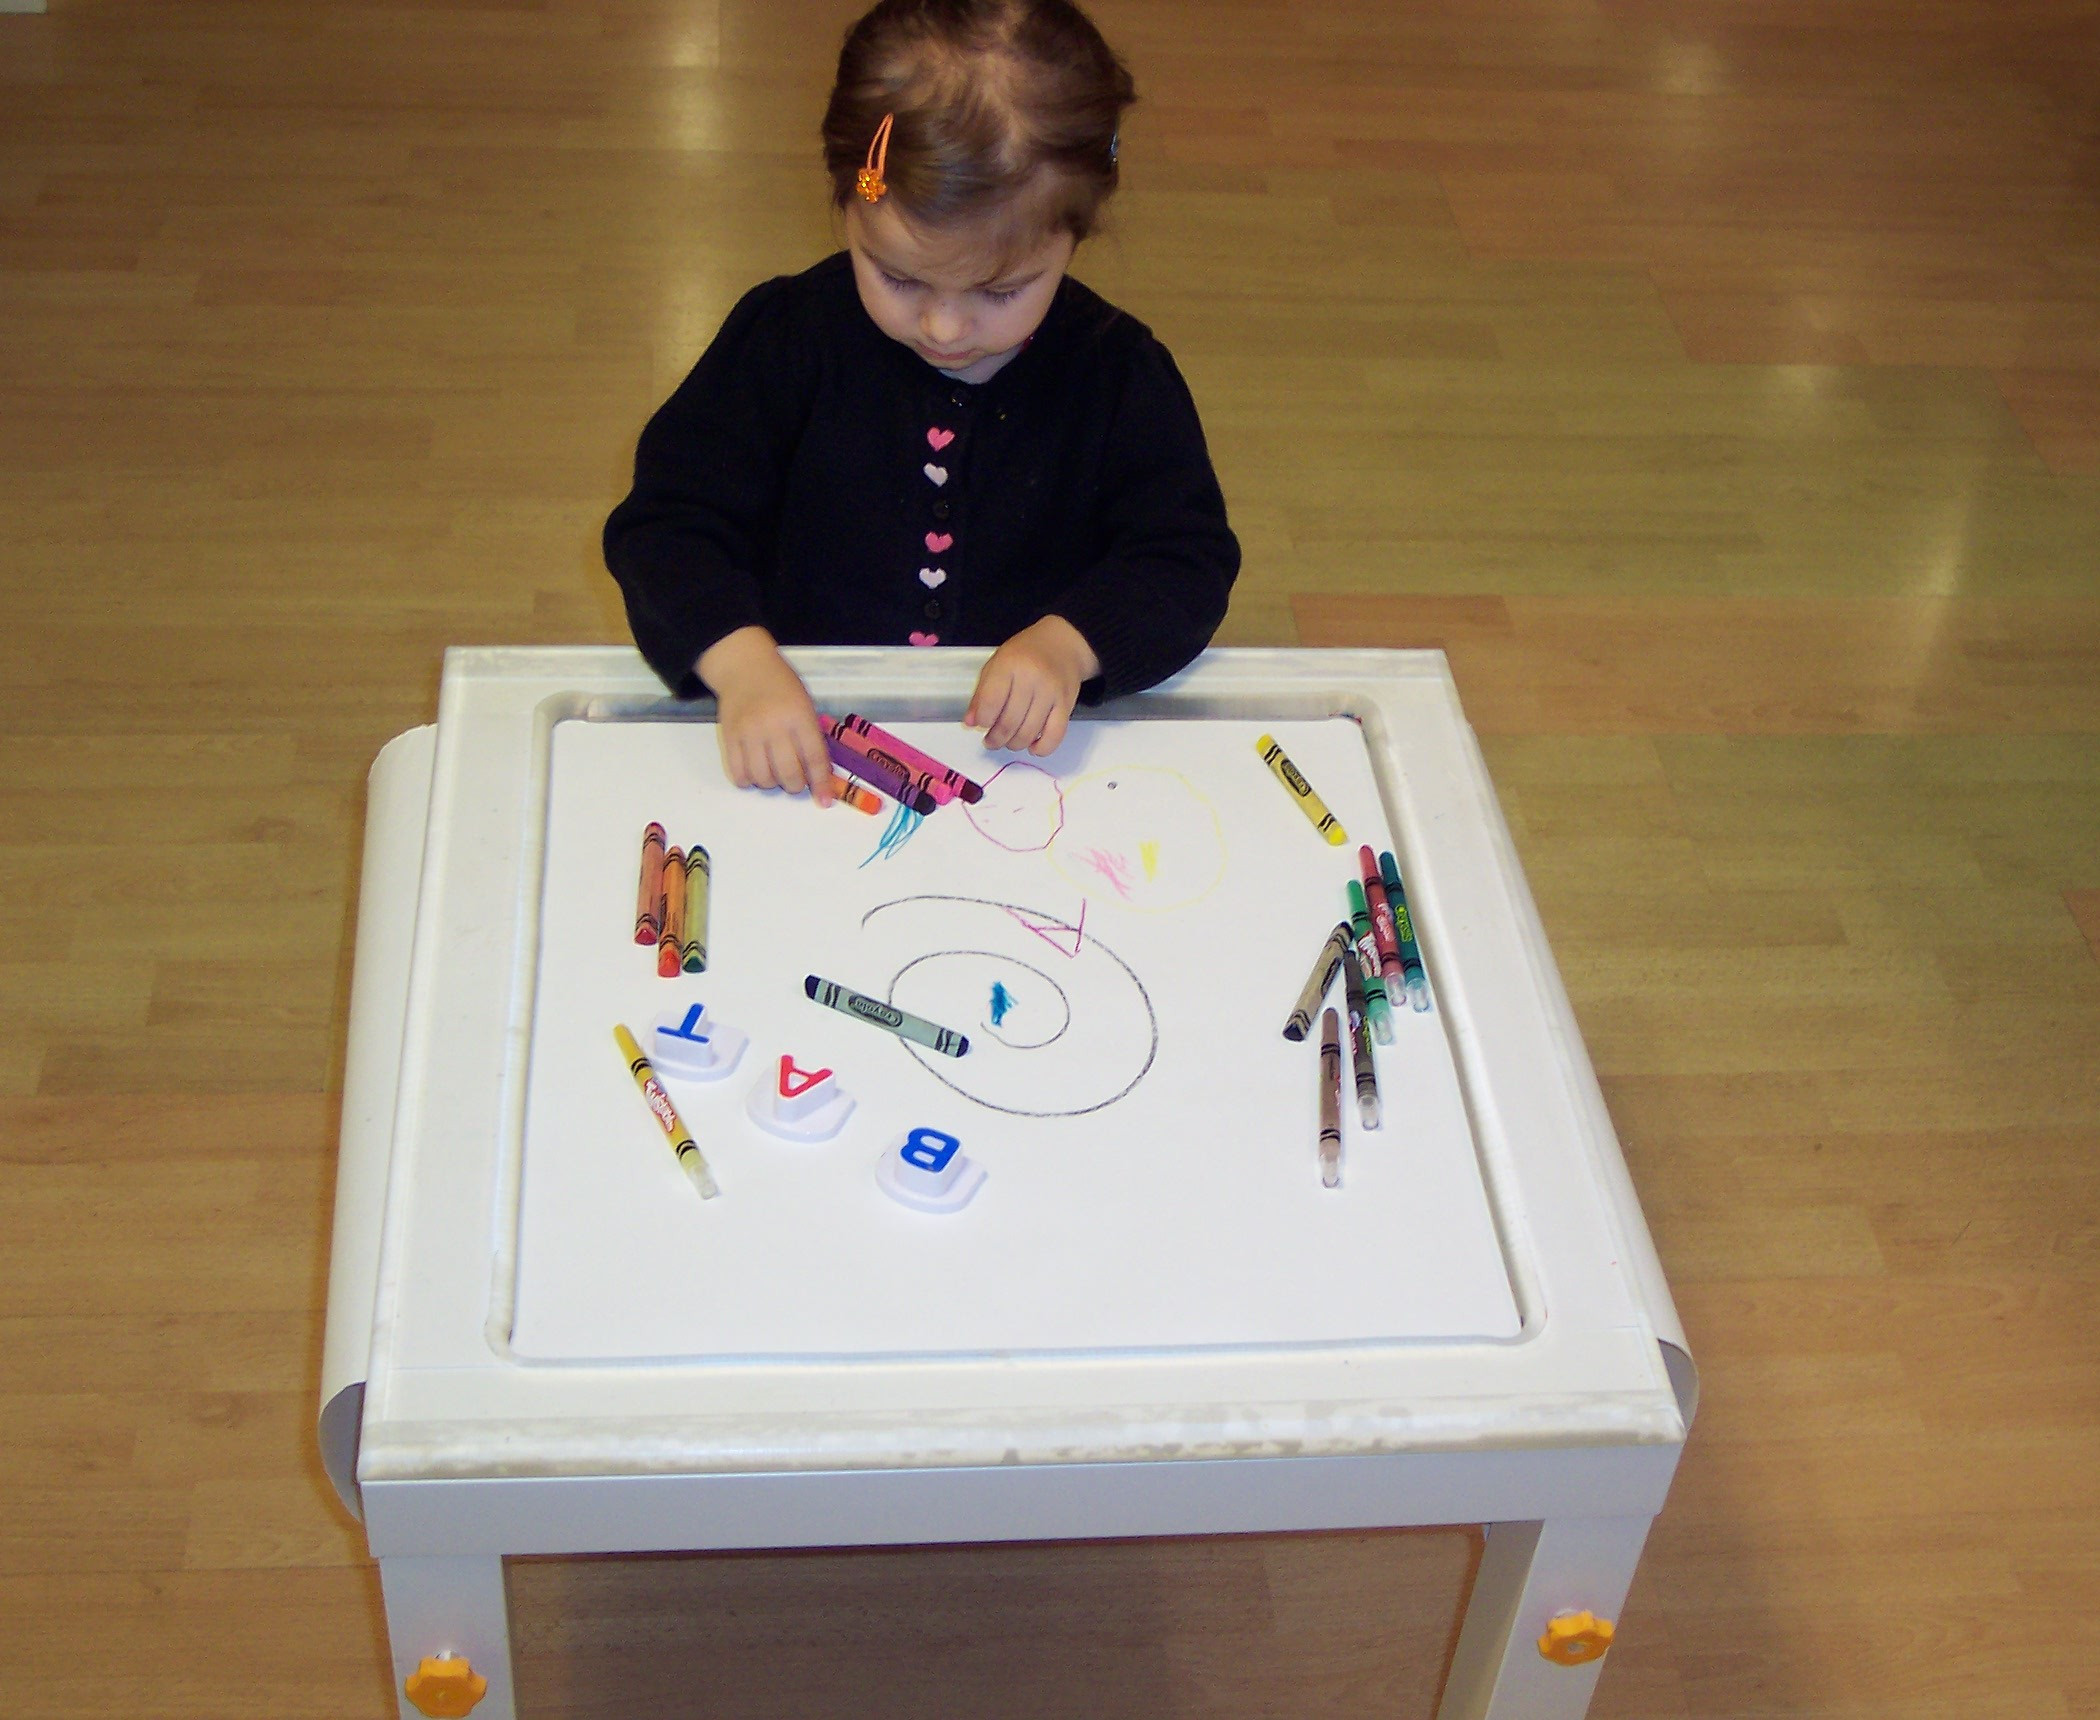 Coloring Table For Kids
 How to make a functional children s coloring table